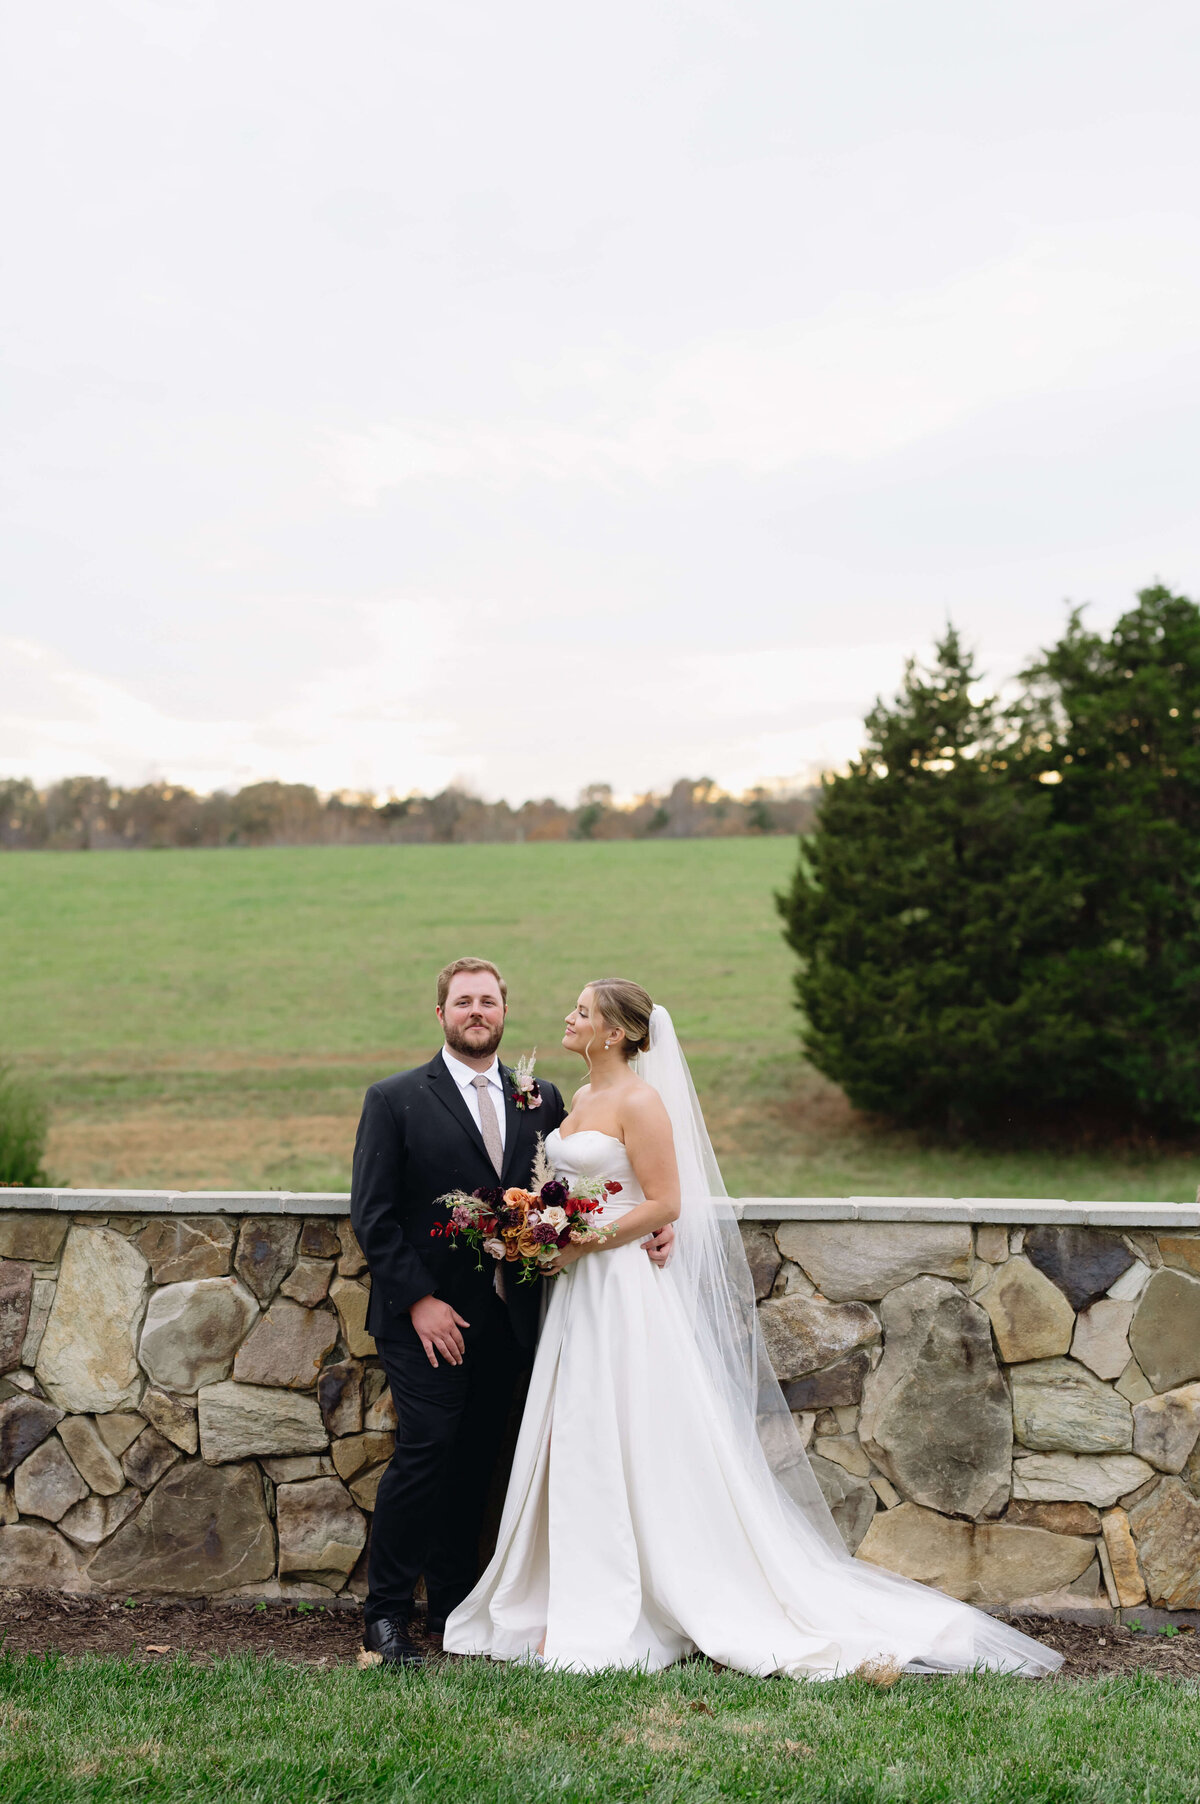 LayZ S Ranch wedding captured by Virginia wedding photographer with bride and groom standing close to each other in front of a stone wall with green hills behind them